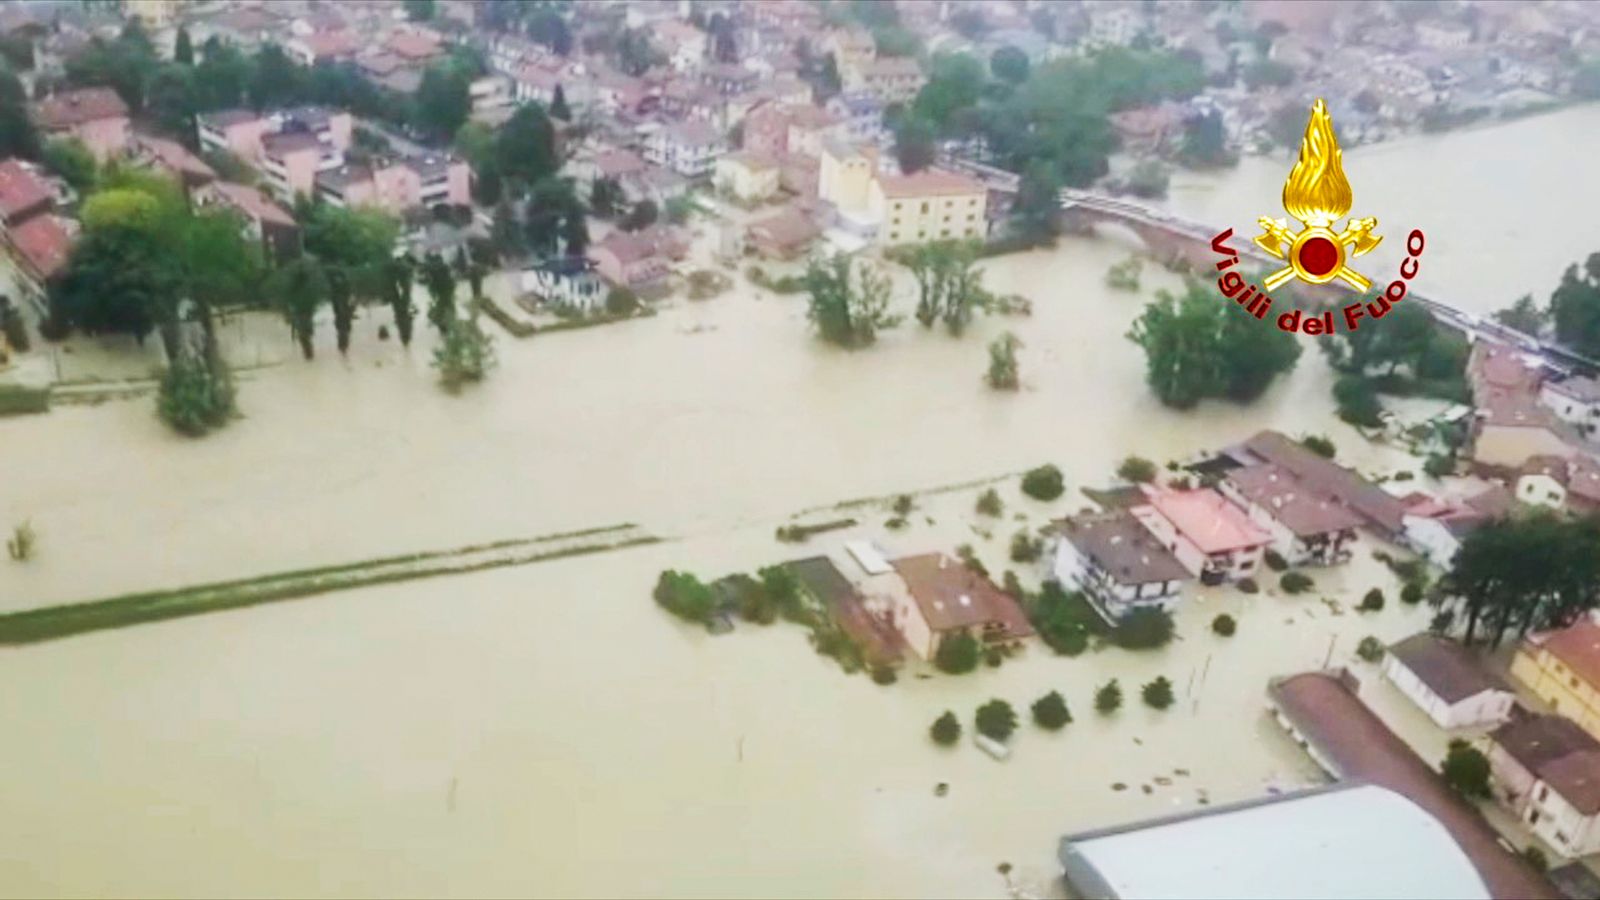 Grand Prix in Italy called off amid deadly flooding